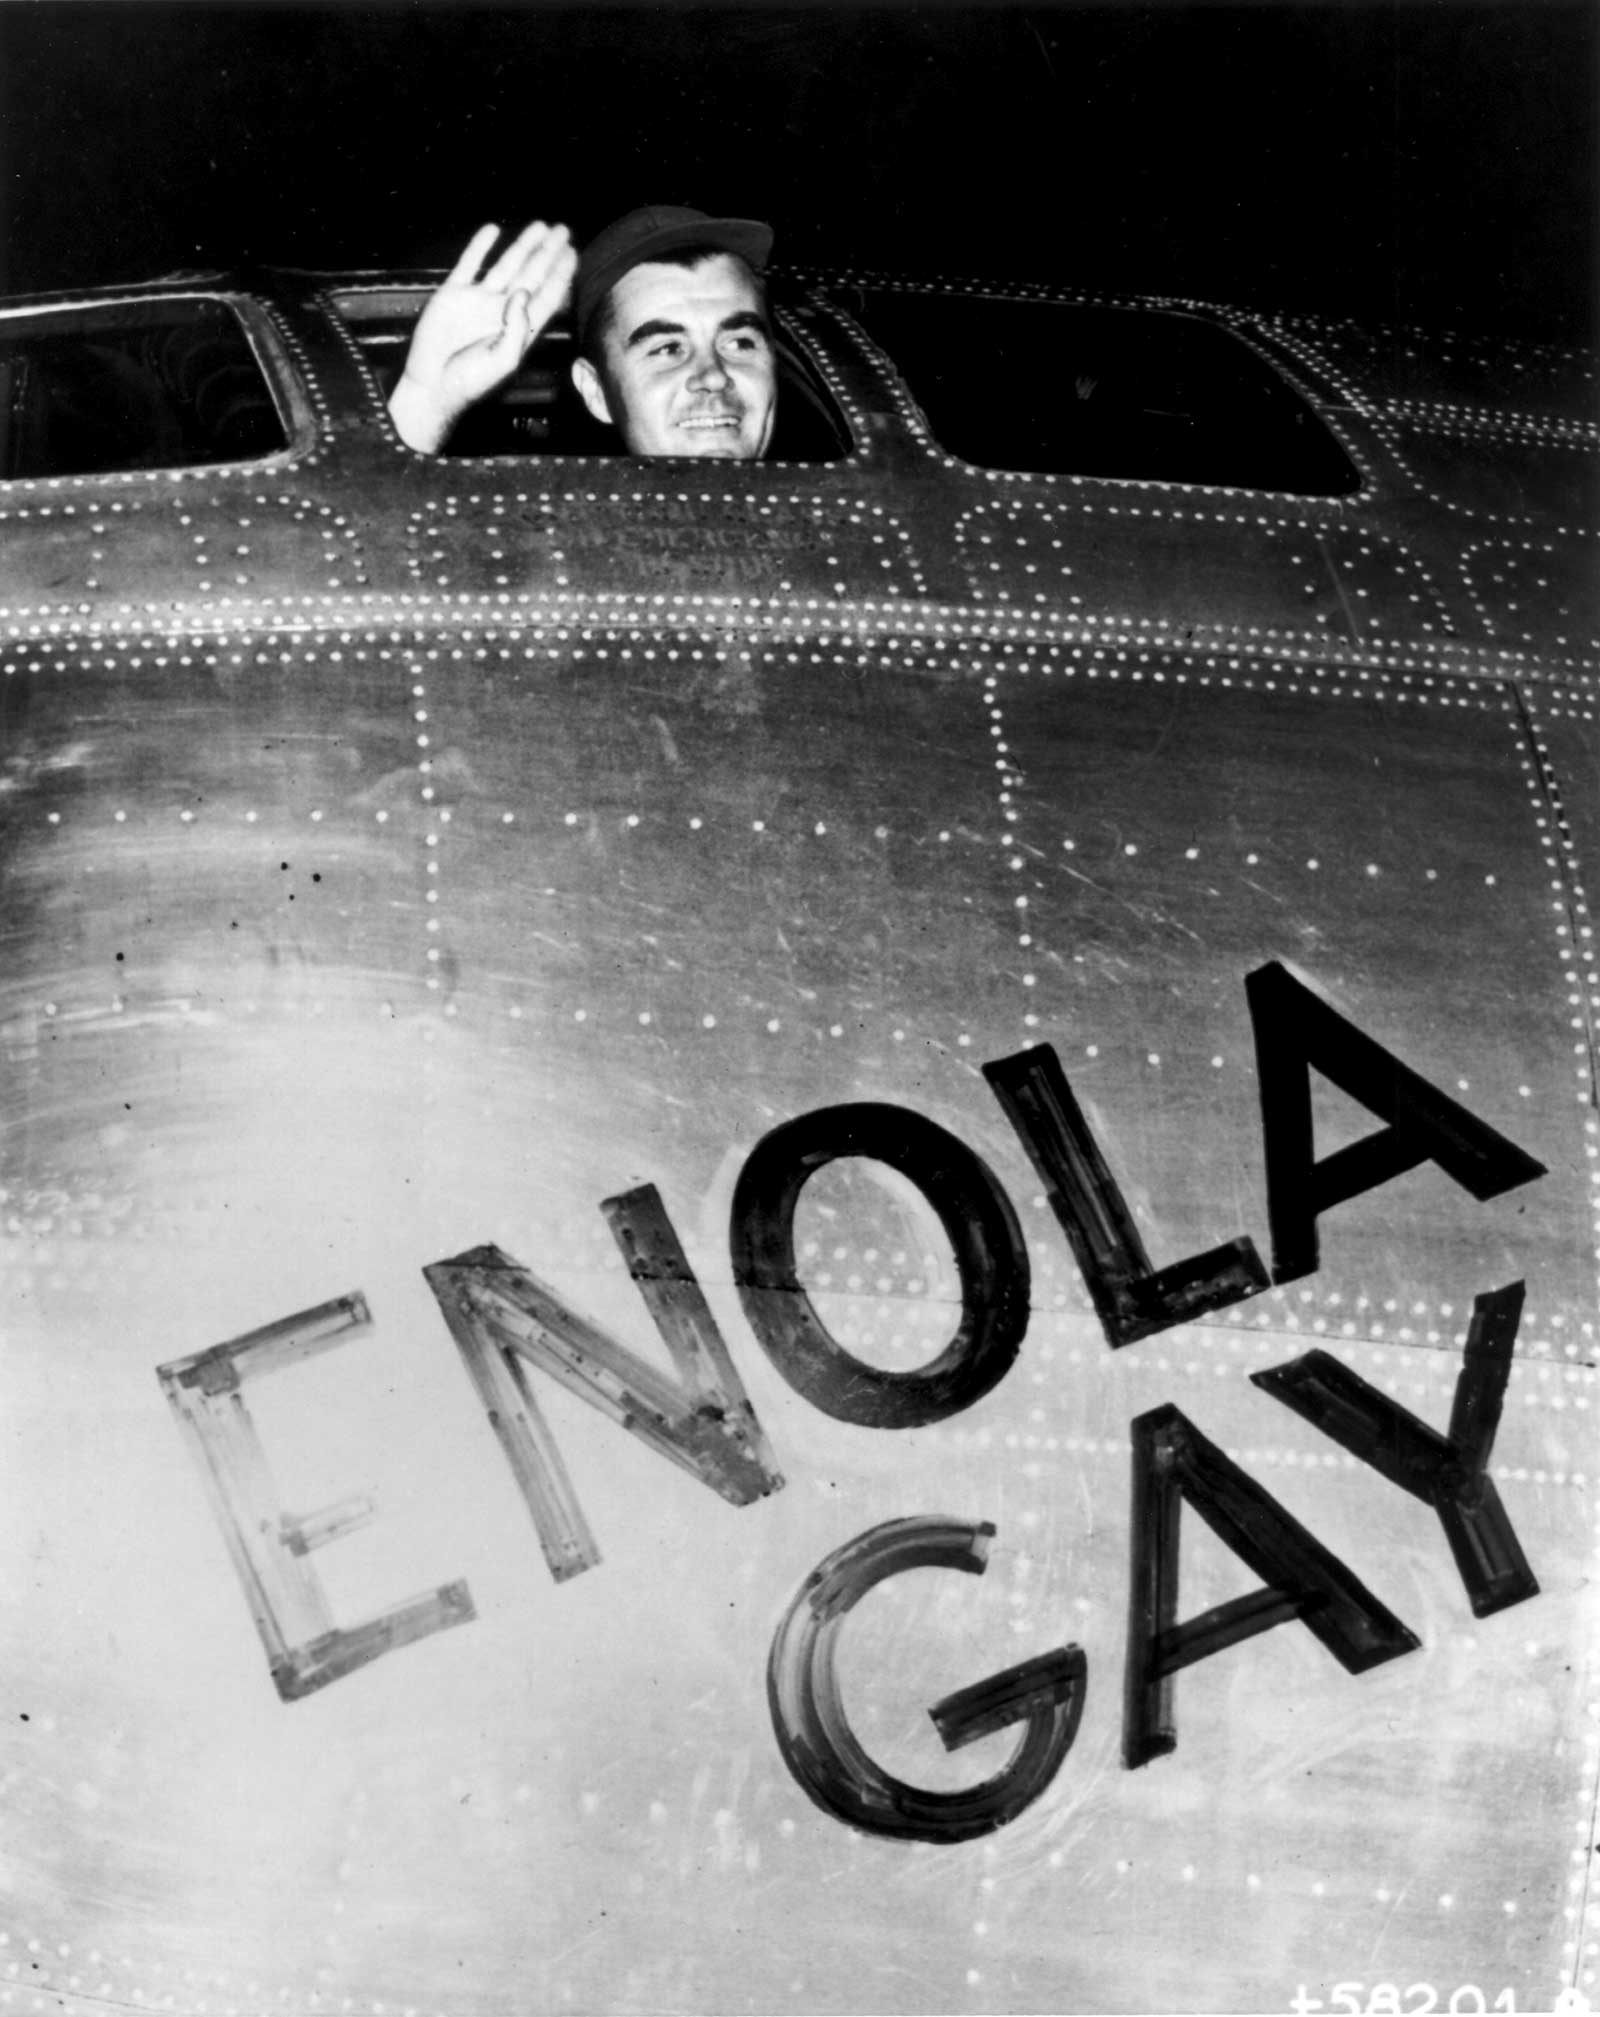 where did the enola gay fly from